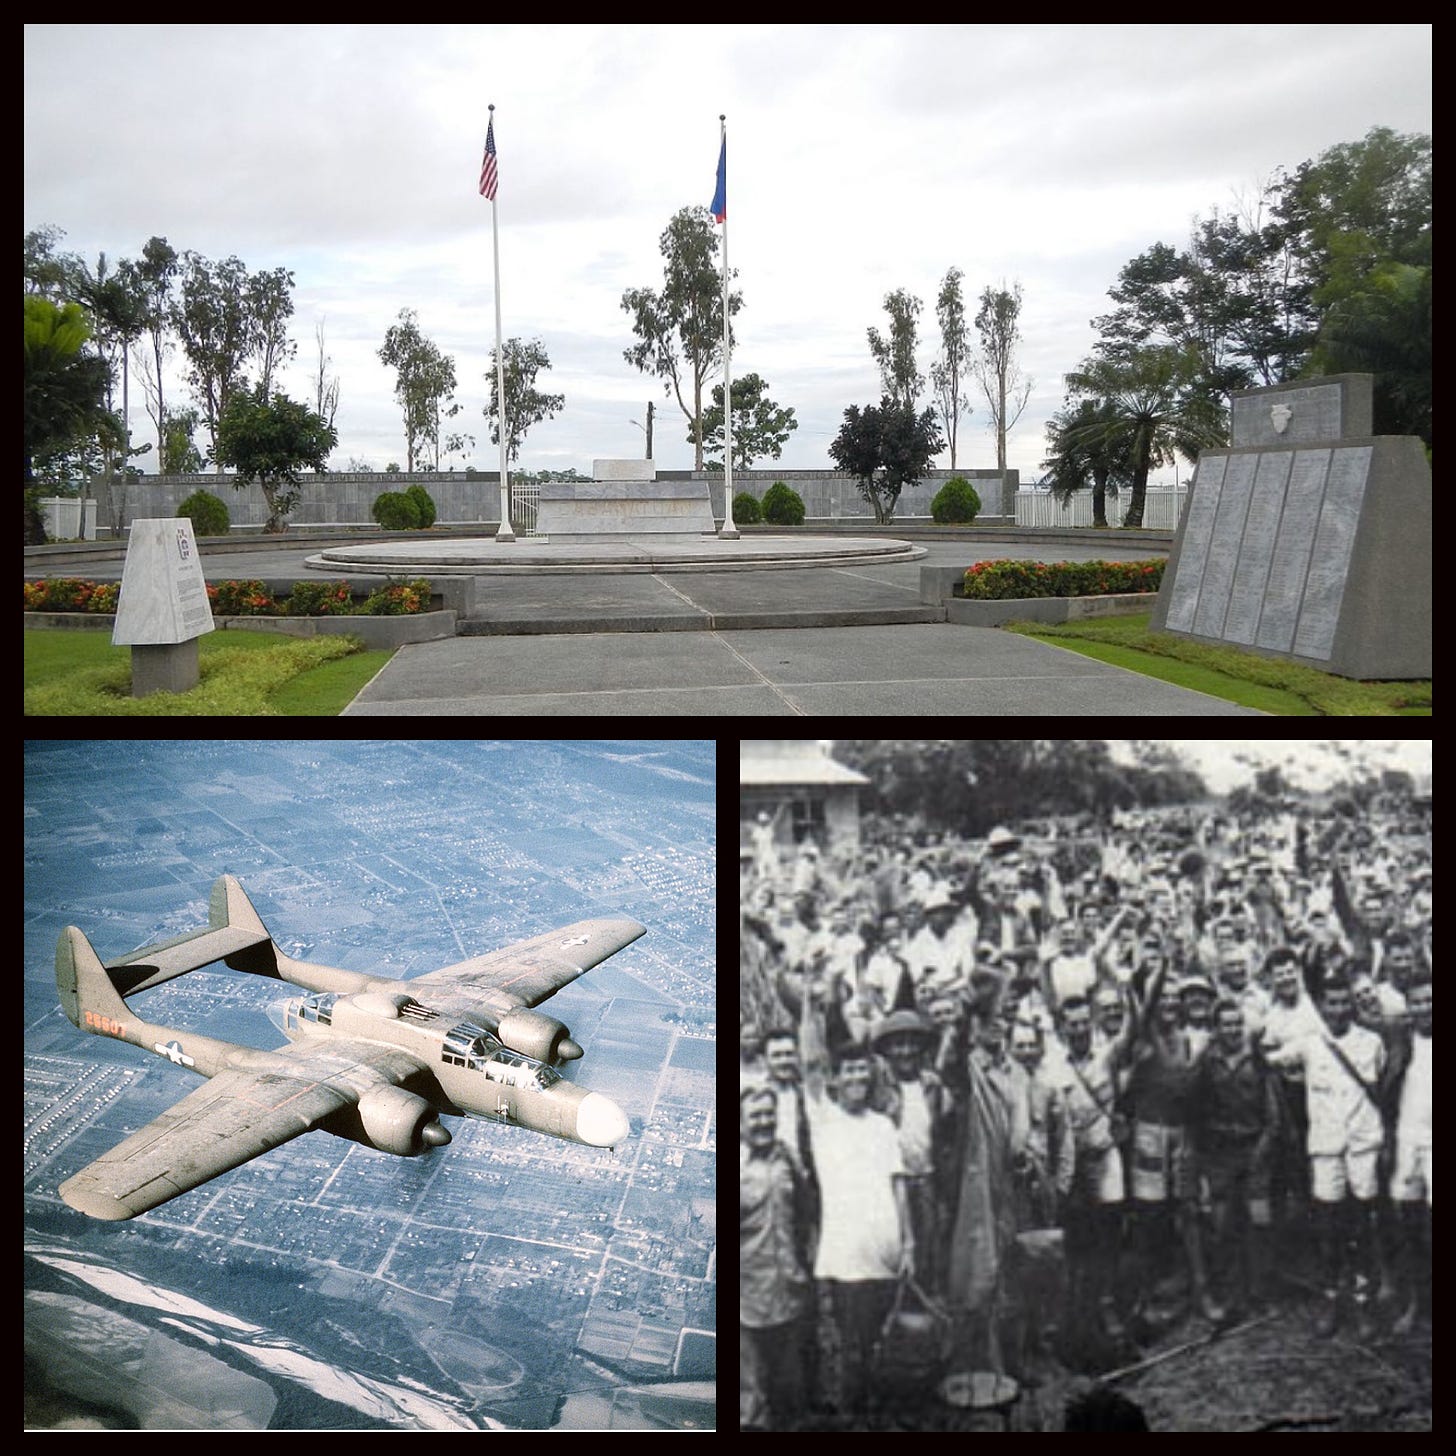 A collage of three pictures: (1) Memorial outside the camp where POWs were held; (2) black and white photo of POWs celebrating after they are rescued; and (3) A P-61 Black Widow similar to the one that was used as a distraction. 